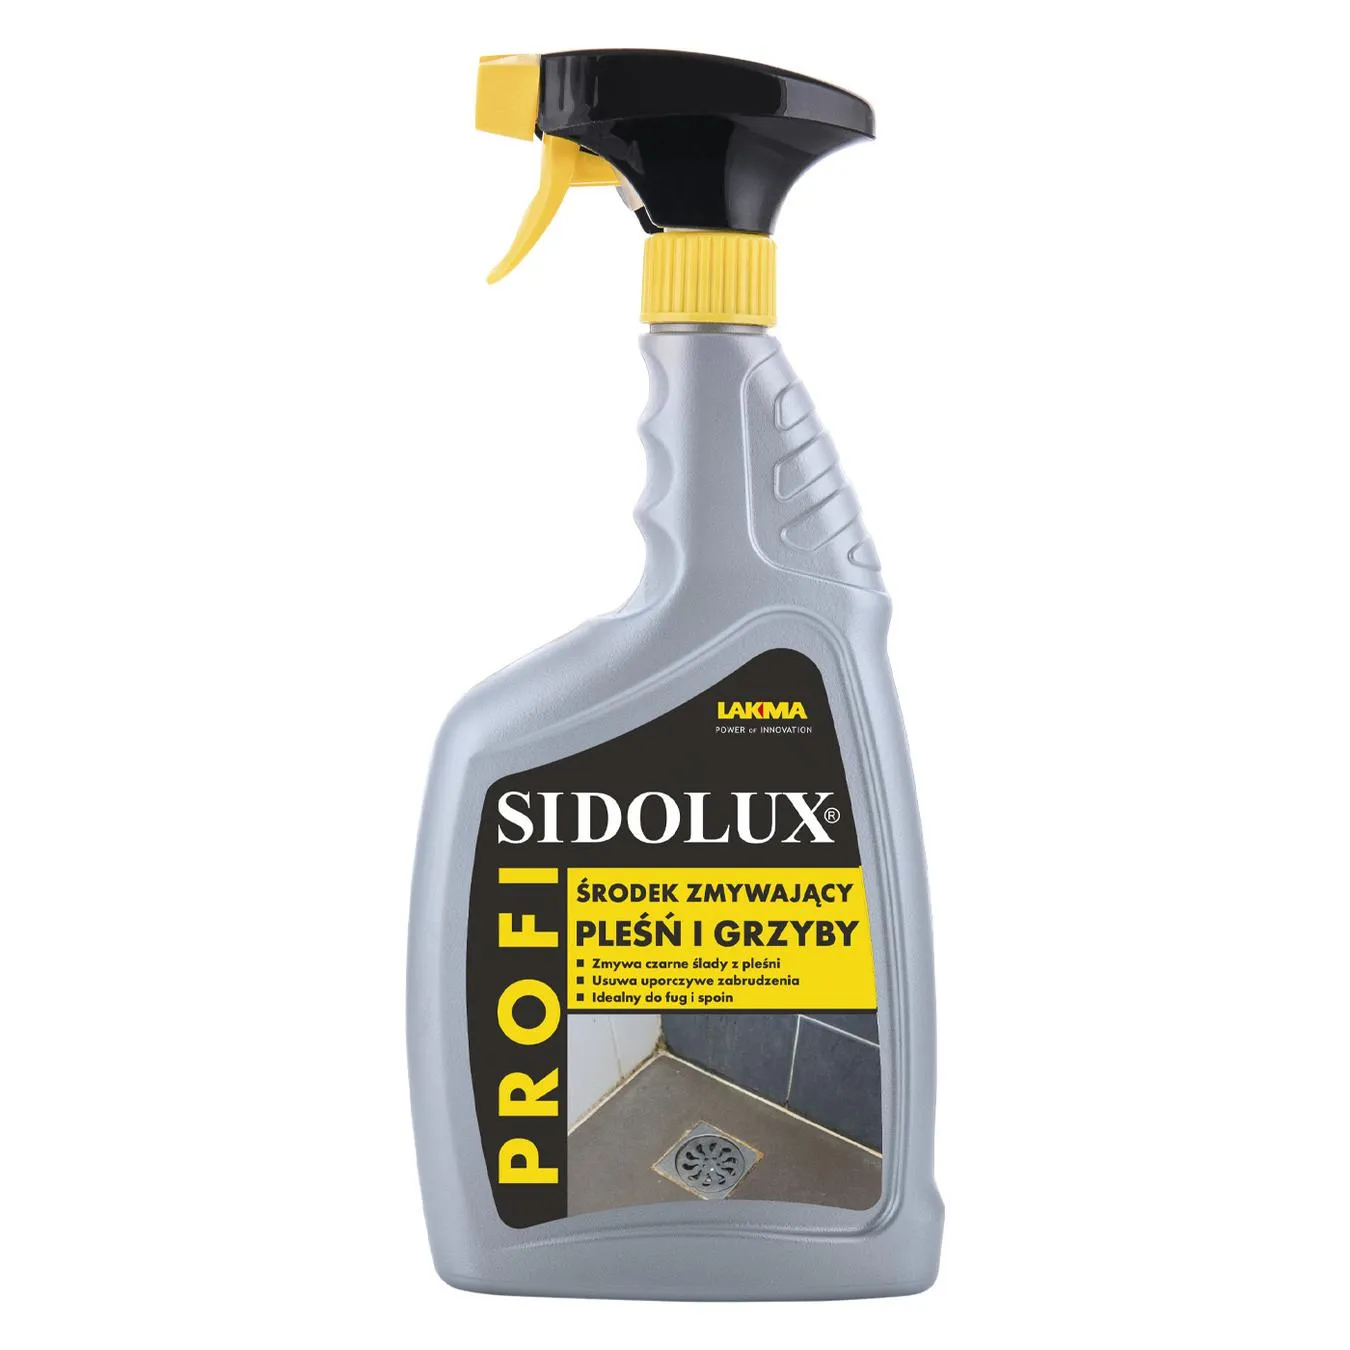 Sidolux Profi means for removing mold and fungi 750 ml